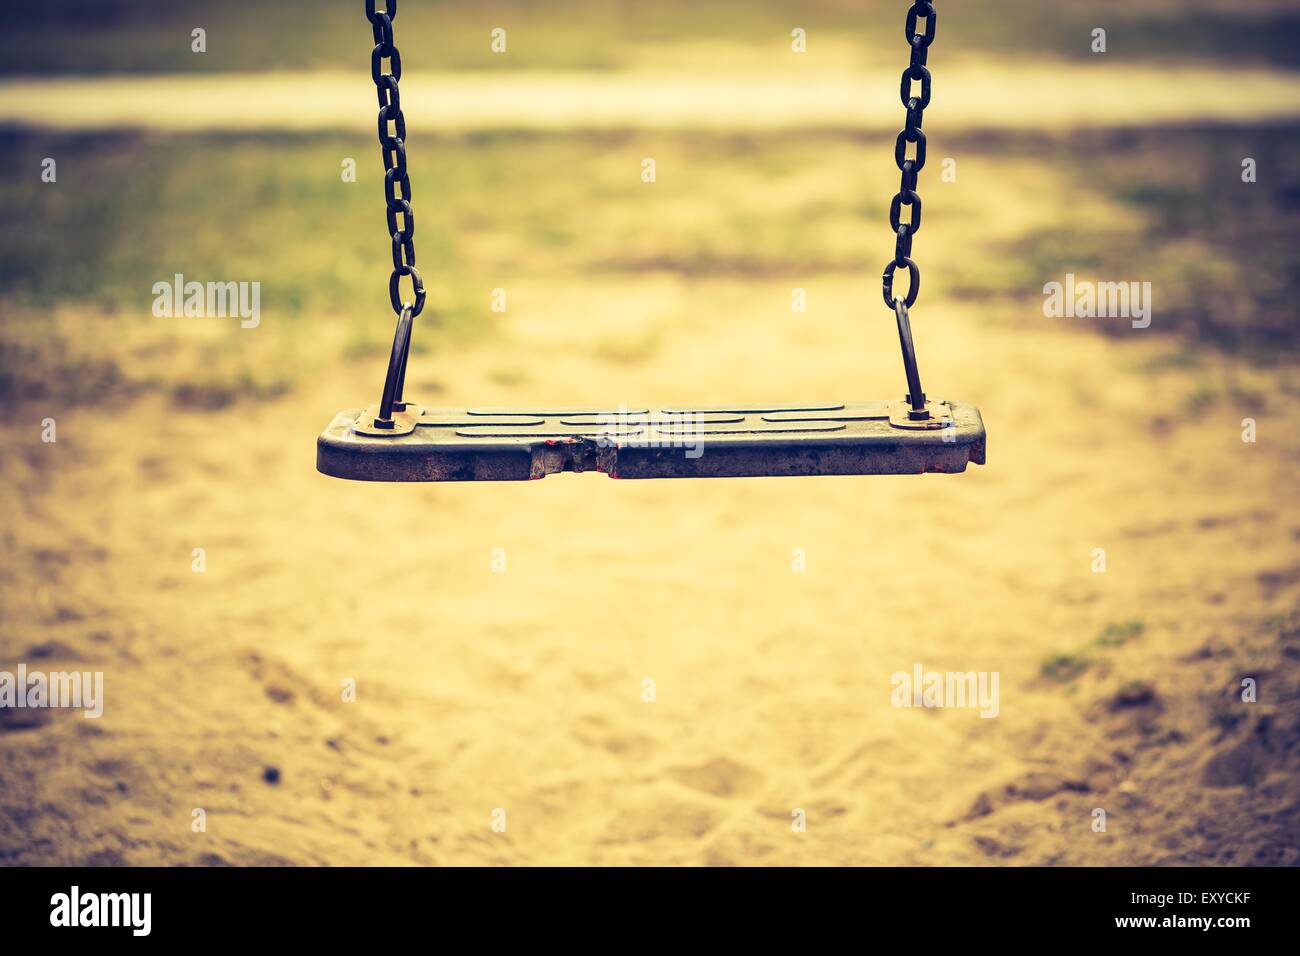 Vintage photo of empty swing on children playground in city. Old fashioned colors photography. Stock Photo